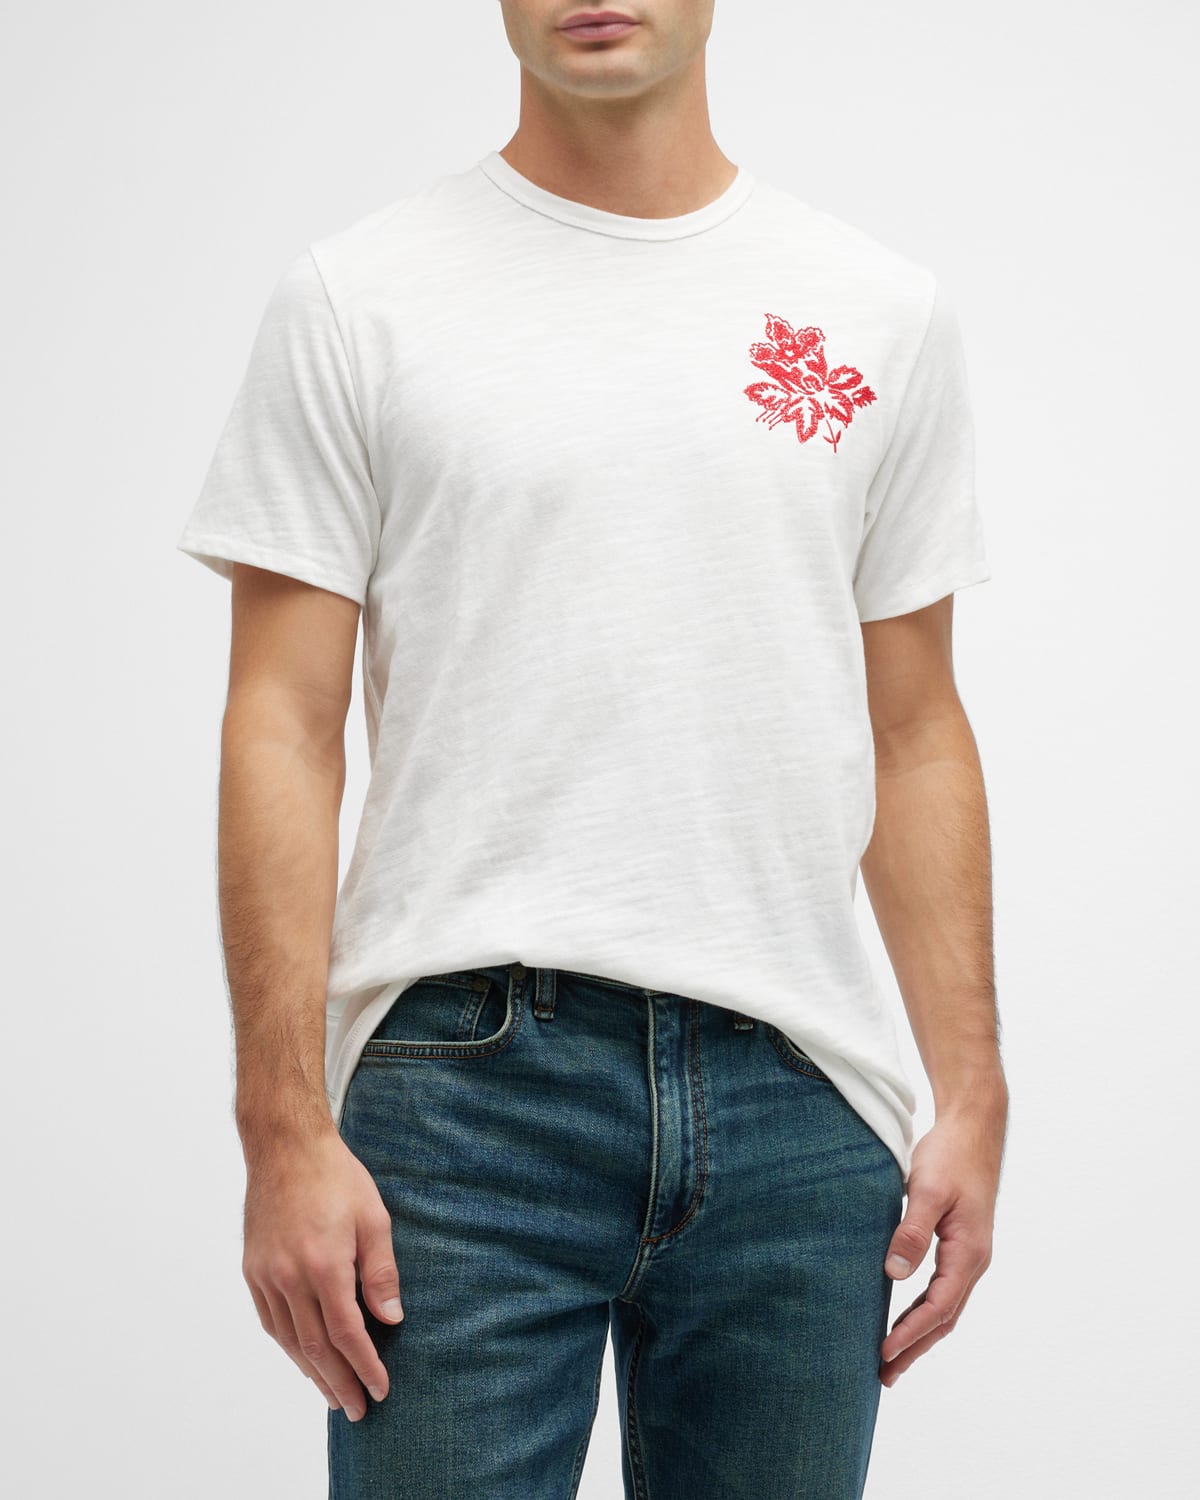 Men's Lunar New Year Embroidered T-Shirt